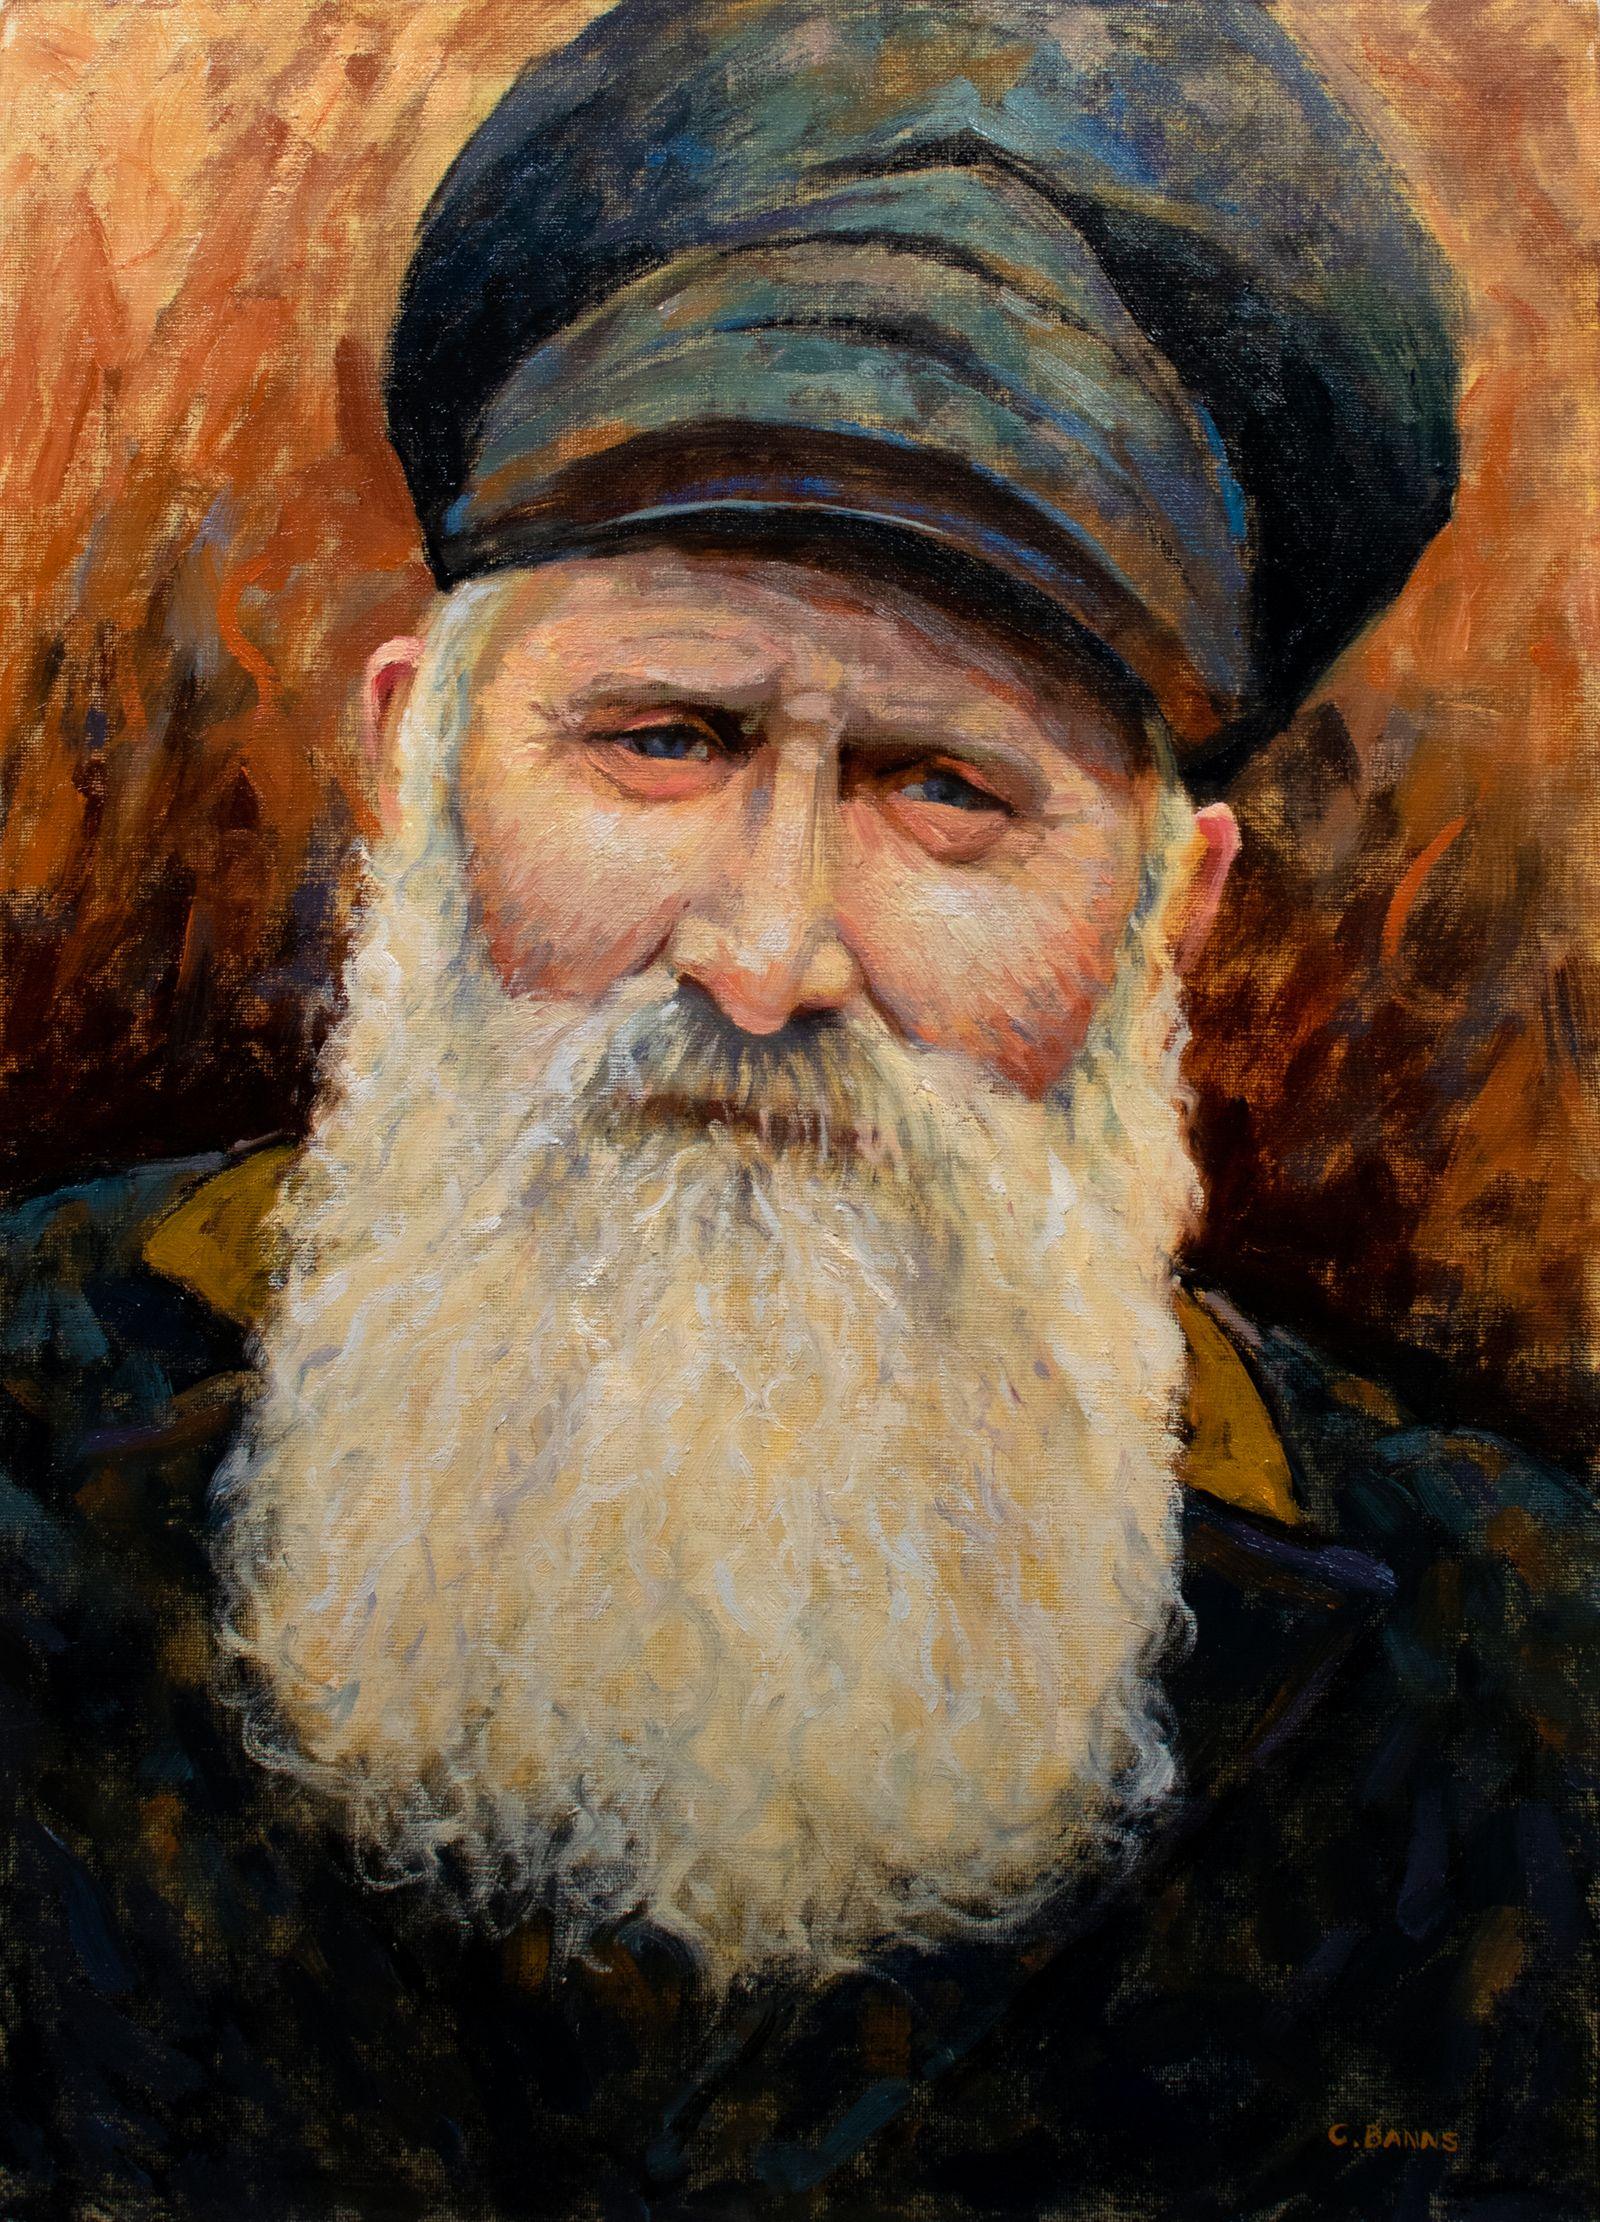 This is an original oil painting of an elderly Swedish fisherman, using impressionistic techniques and the finest professional oil paints. The painting is sized 46cm x 33cm on canvas attached to board (aka canvasboard by Clairefontaine). It has been